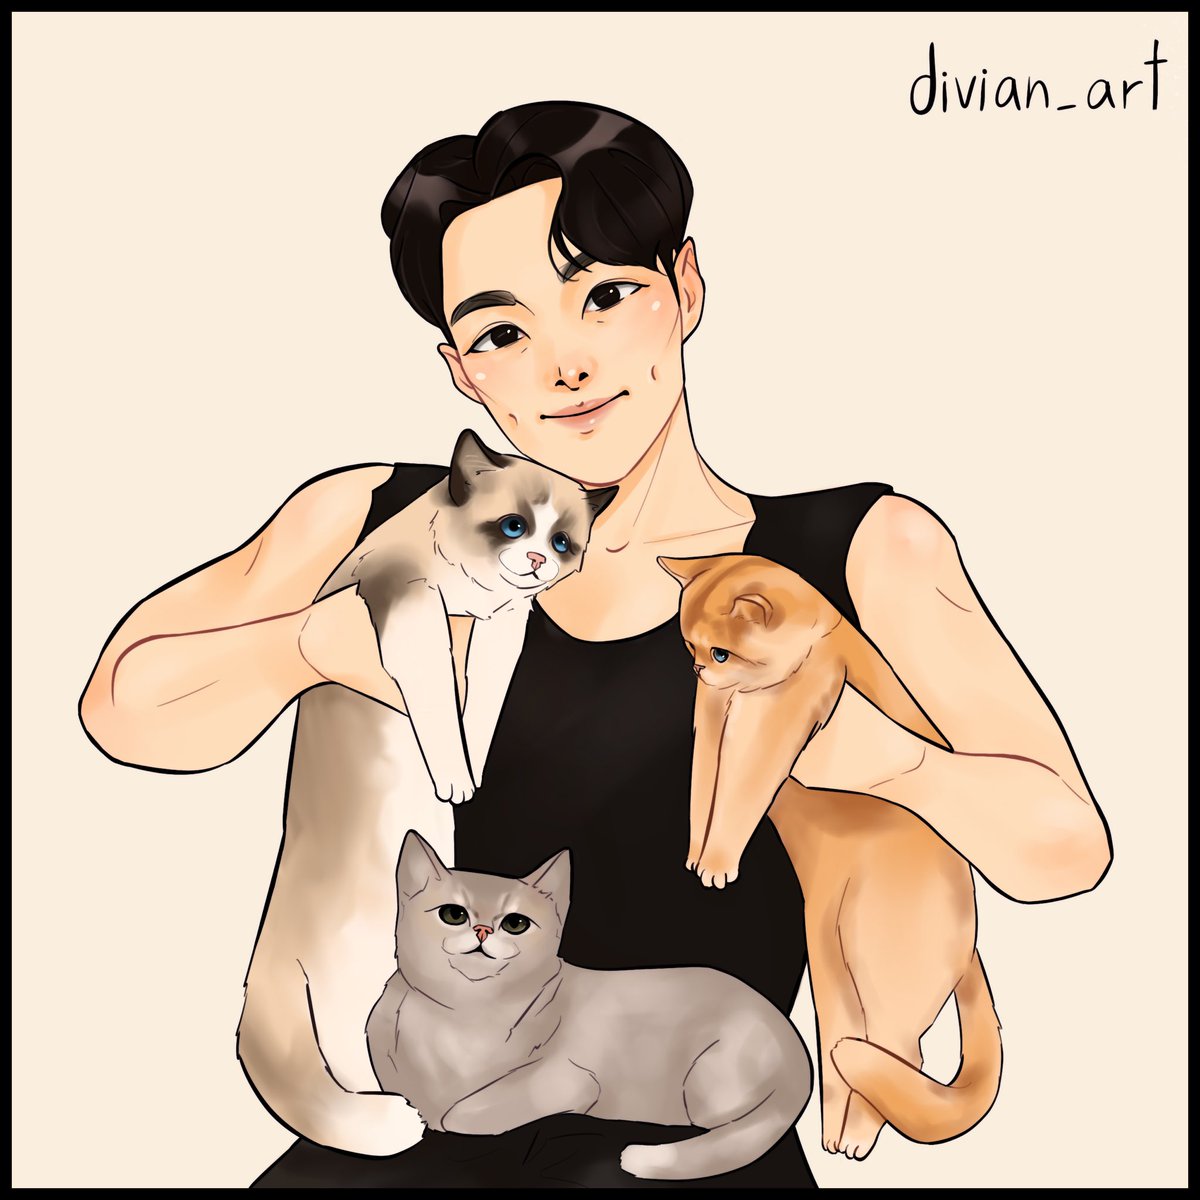 Yixing with his cute cats for his bday 🥳💕
@layzhang #AllRounderLAYDay #LAYTrueFire #YIXING #fanart